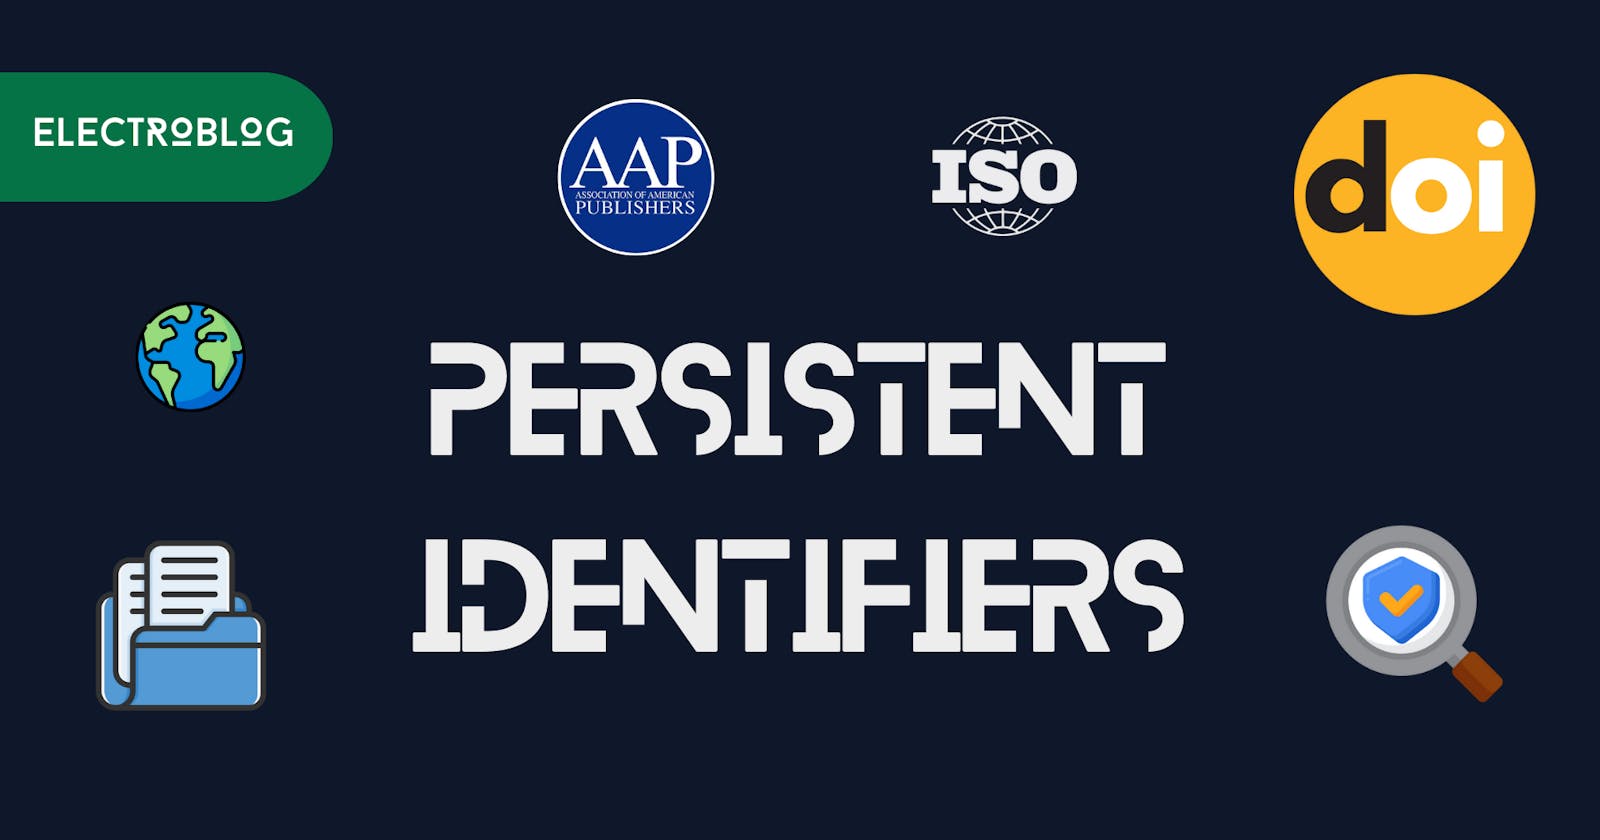 What Are Persistent Identifiers and Why We Need Them